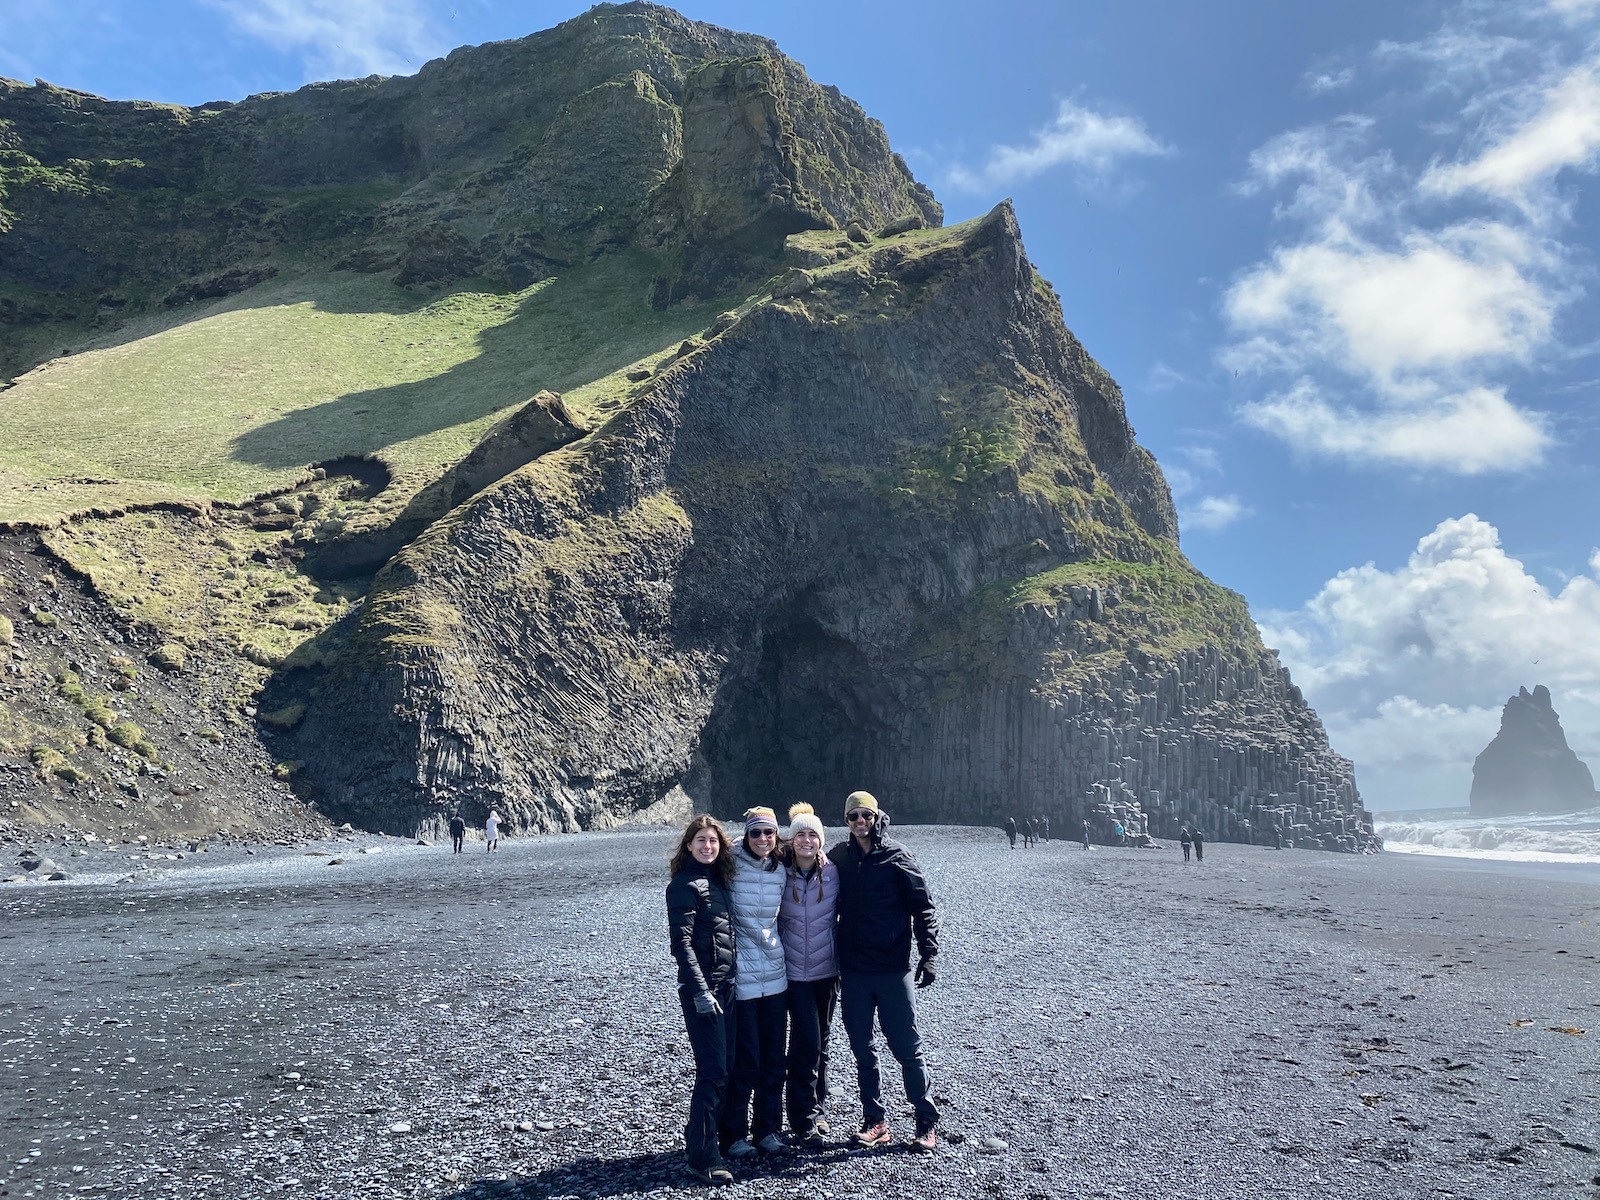 Family posing on beach in front of Basalt Columns in Iceland. 